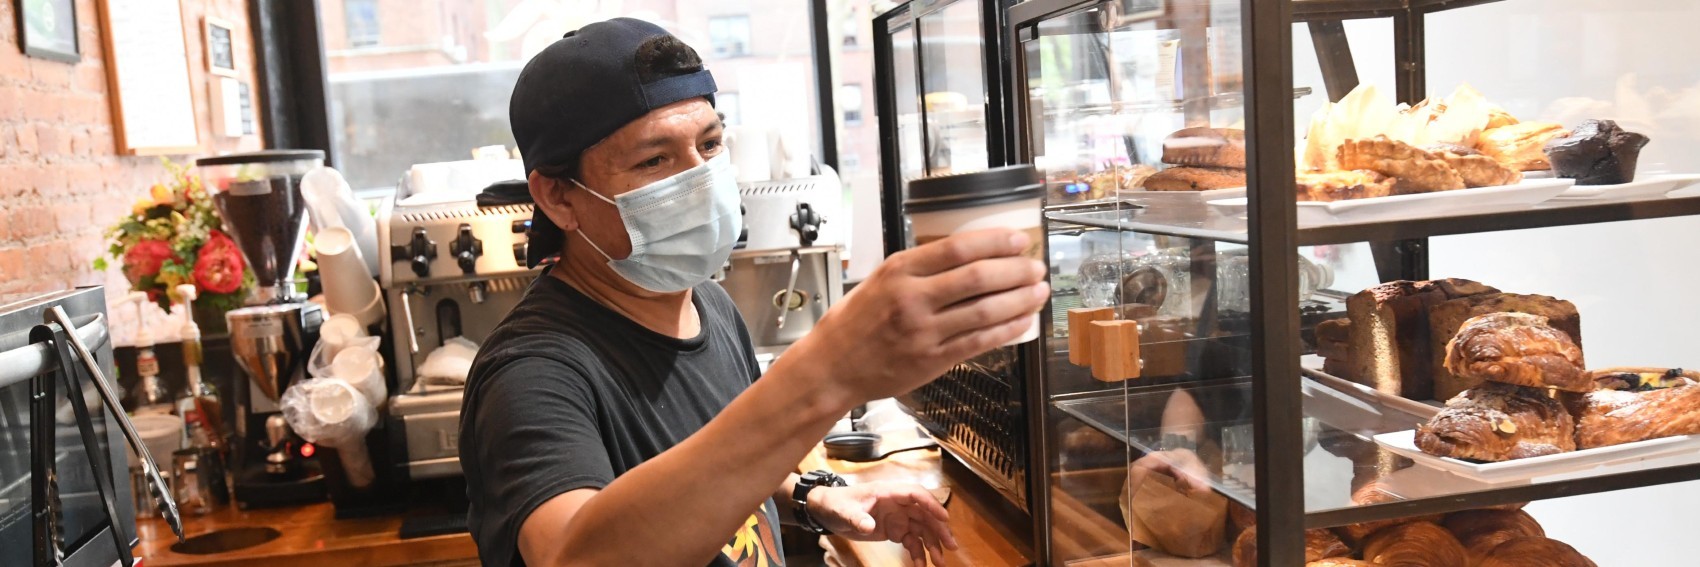 A man in a mask hands a cup of coffee past a display case full of pastries.